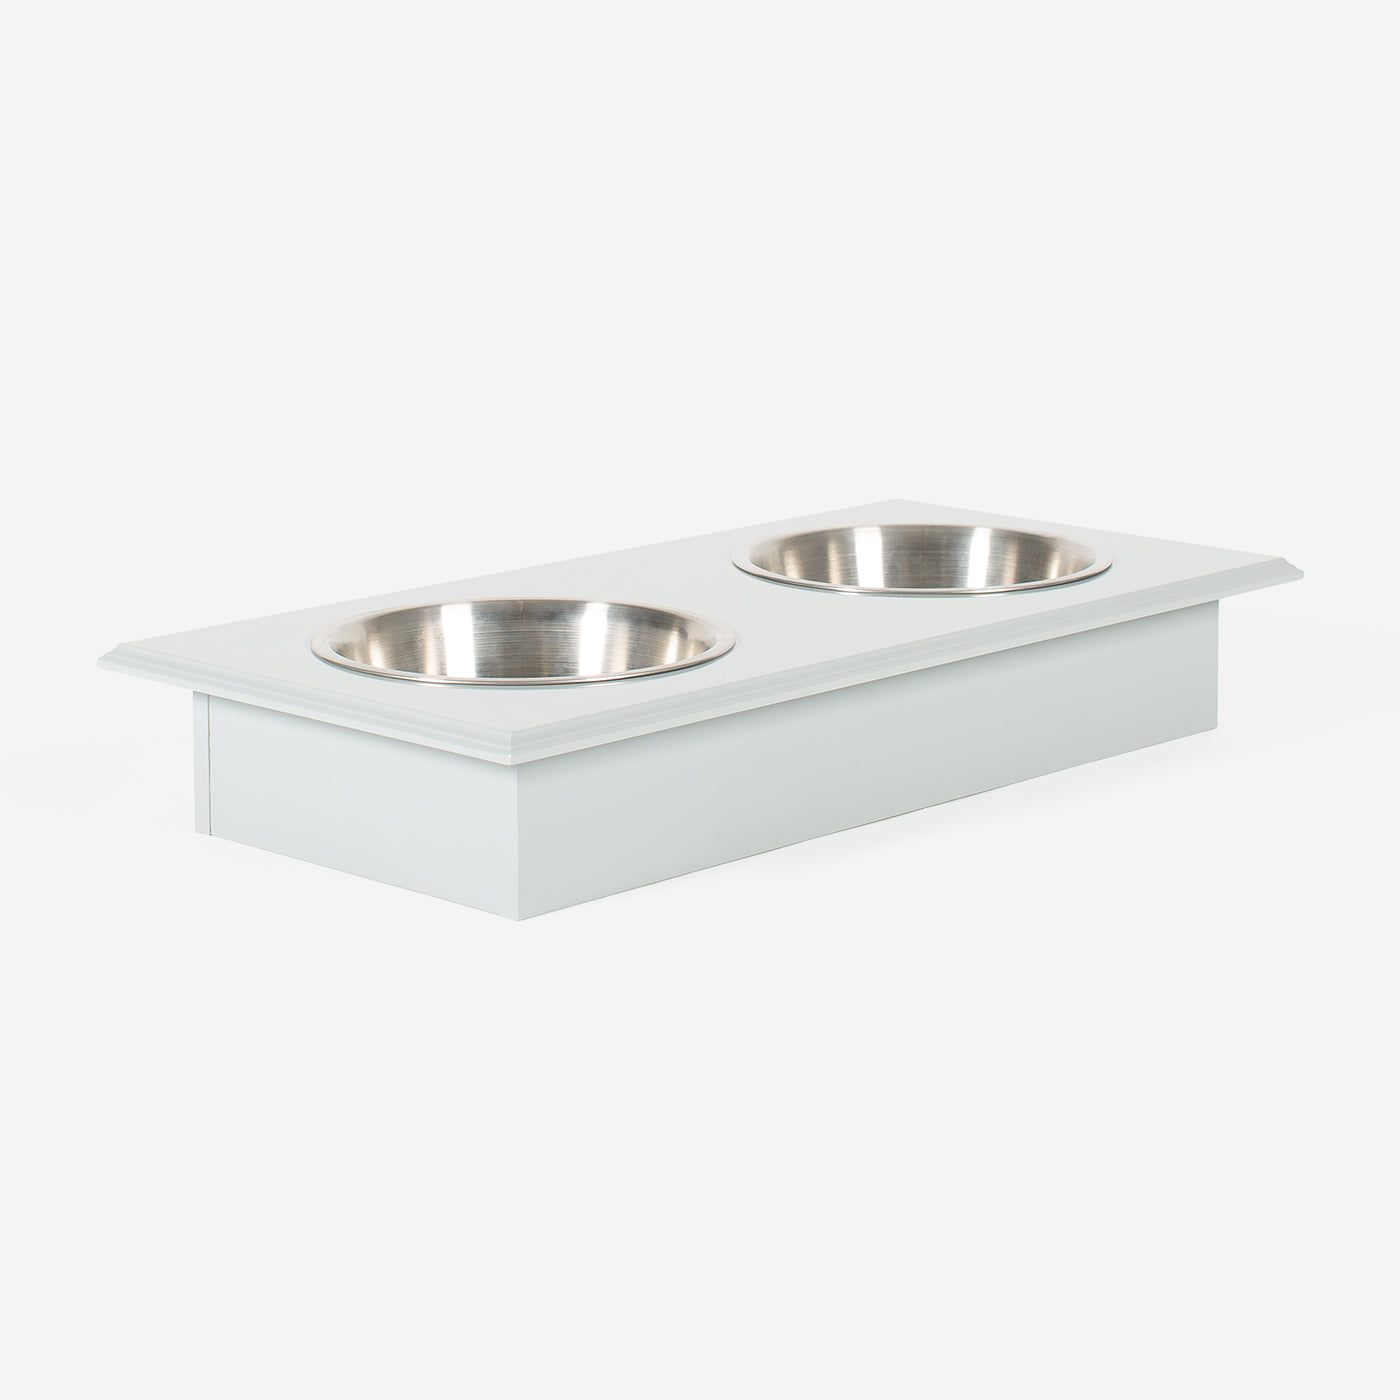 Luxury Wooden Pet Feeder in Grey; this is stylish addition to any home! Crafted from long-lasting wood, this durable feeder is sure to be a great companion to your furry friend for years to come! Available in two stunning colors from Lords and Labradors US